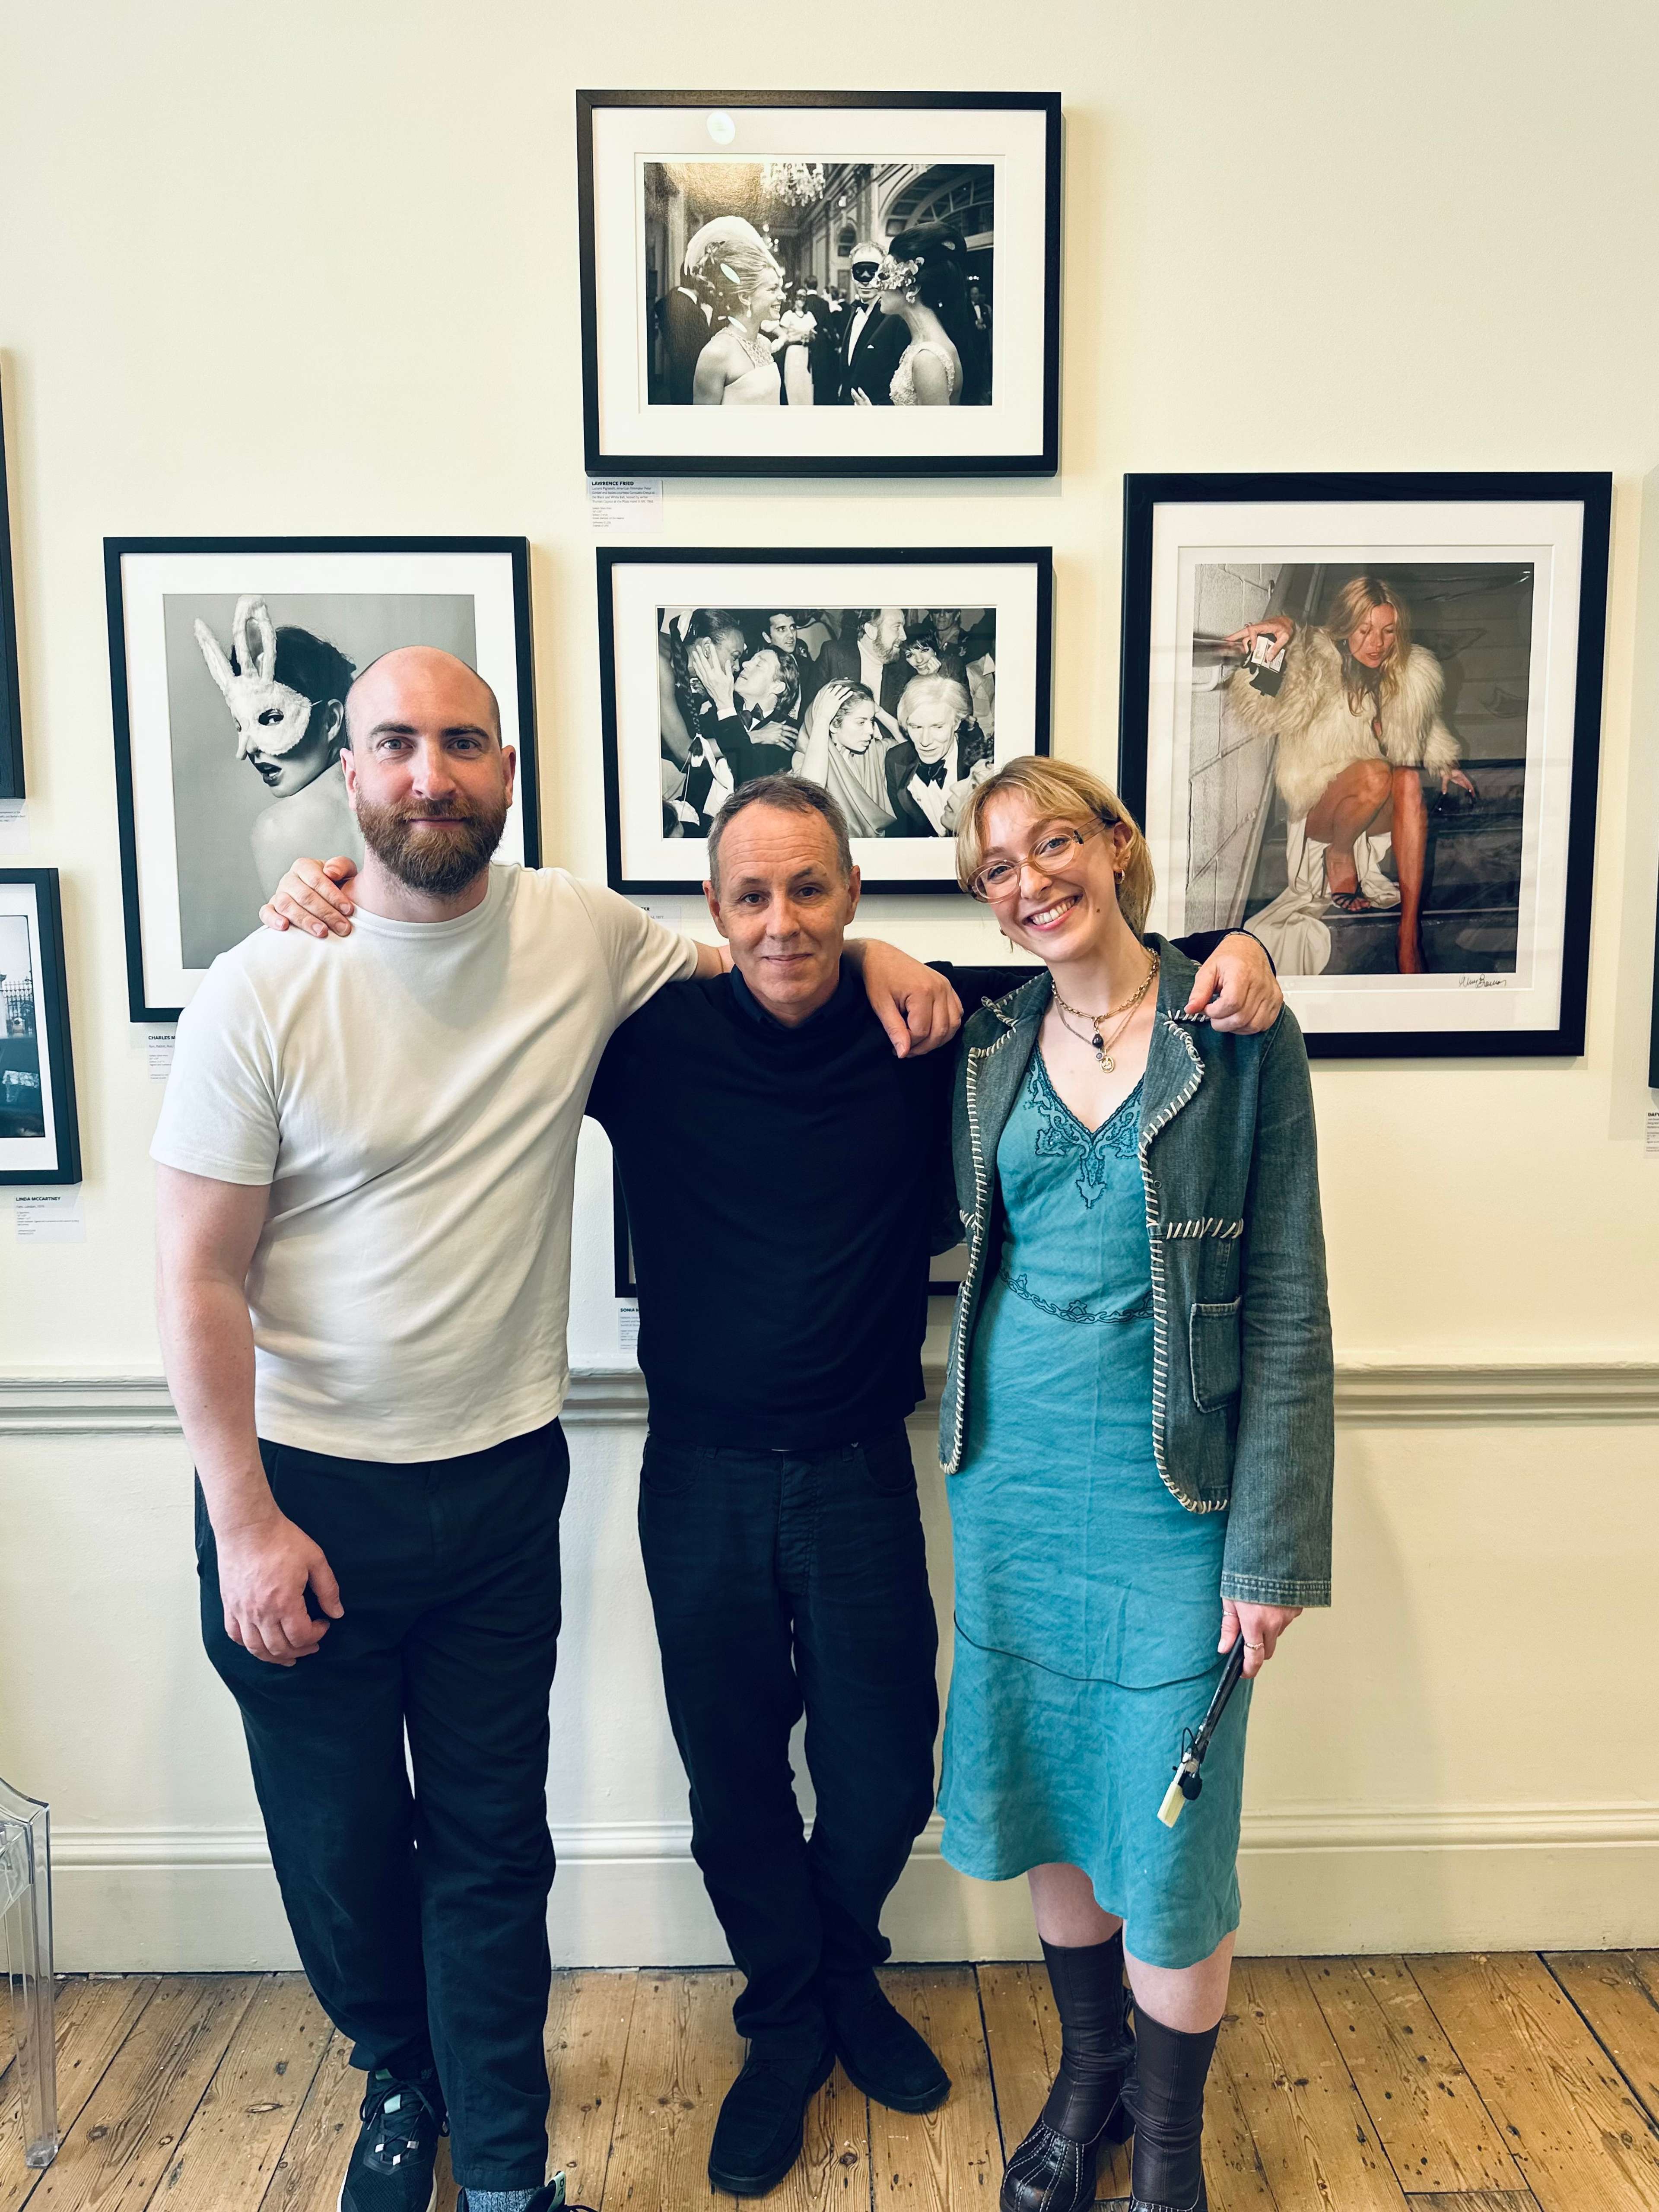 A photograph of Charles Moriarty, Greg Brennan, and Erin-Atlanta Argun at the Iconic Images booth at Photo London, standing in front of photographs hanging on the wall